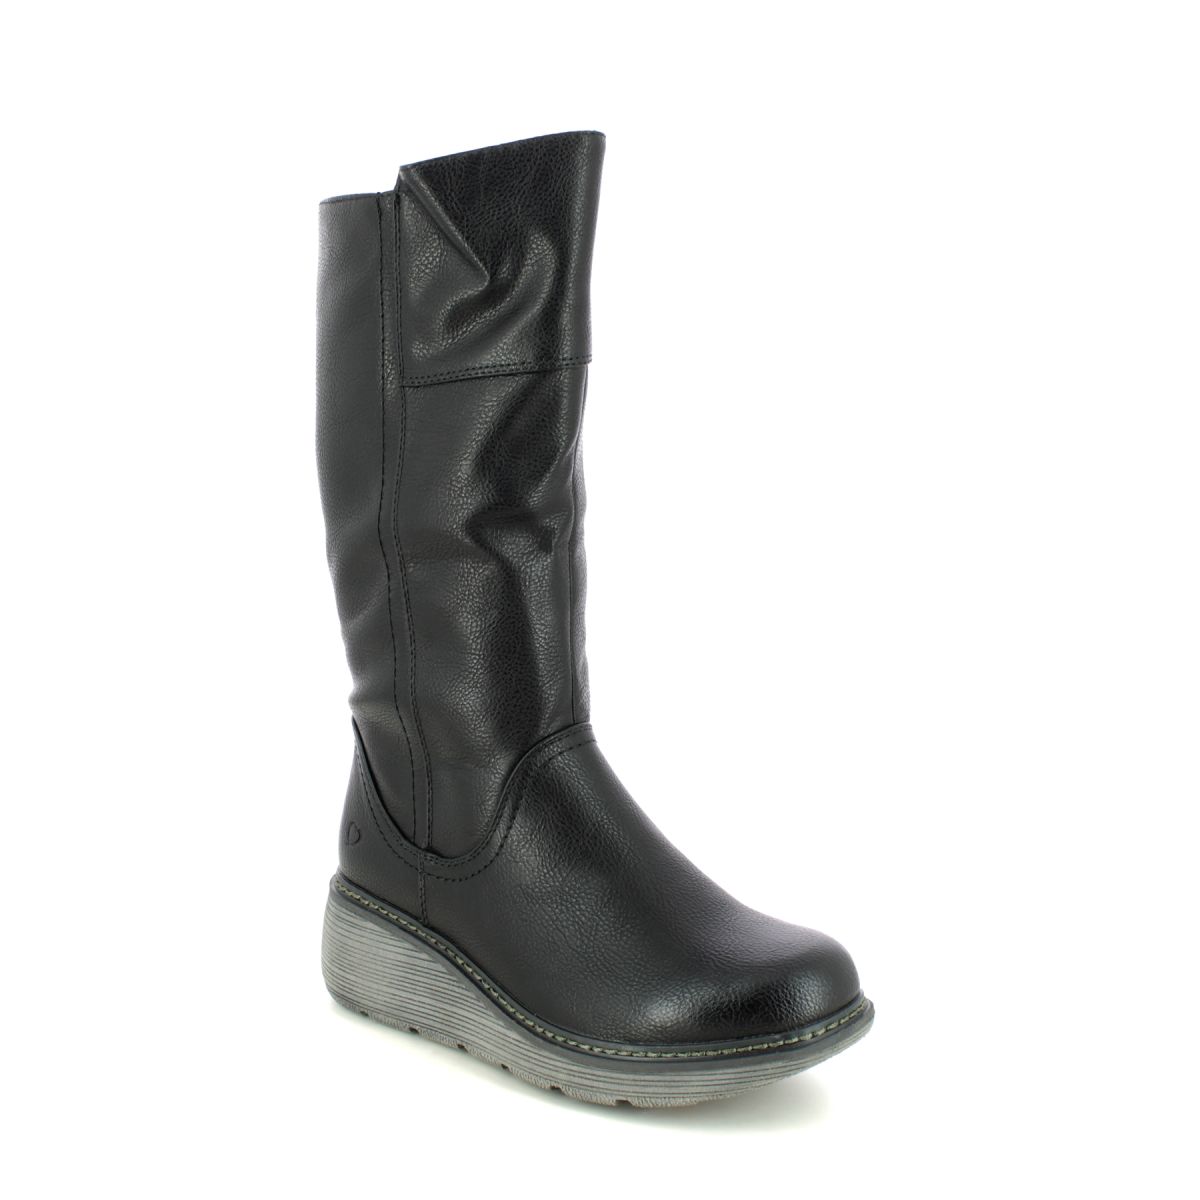 Heavenly Feet Lombardy Wedge Black Womens Mid Calf Boots 3005-34 In Size 4 In Plain Black